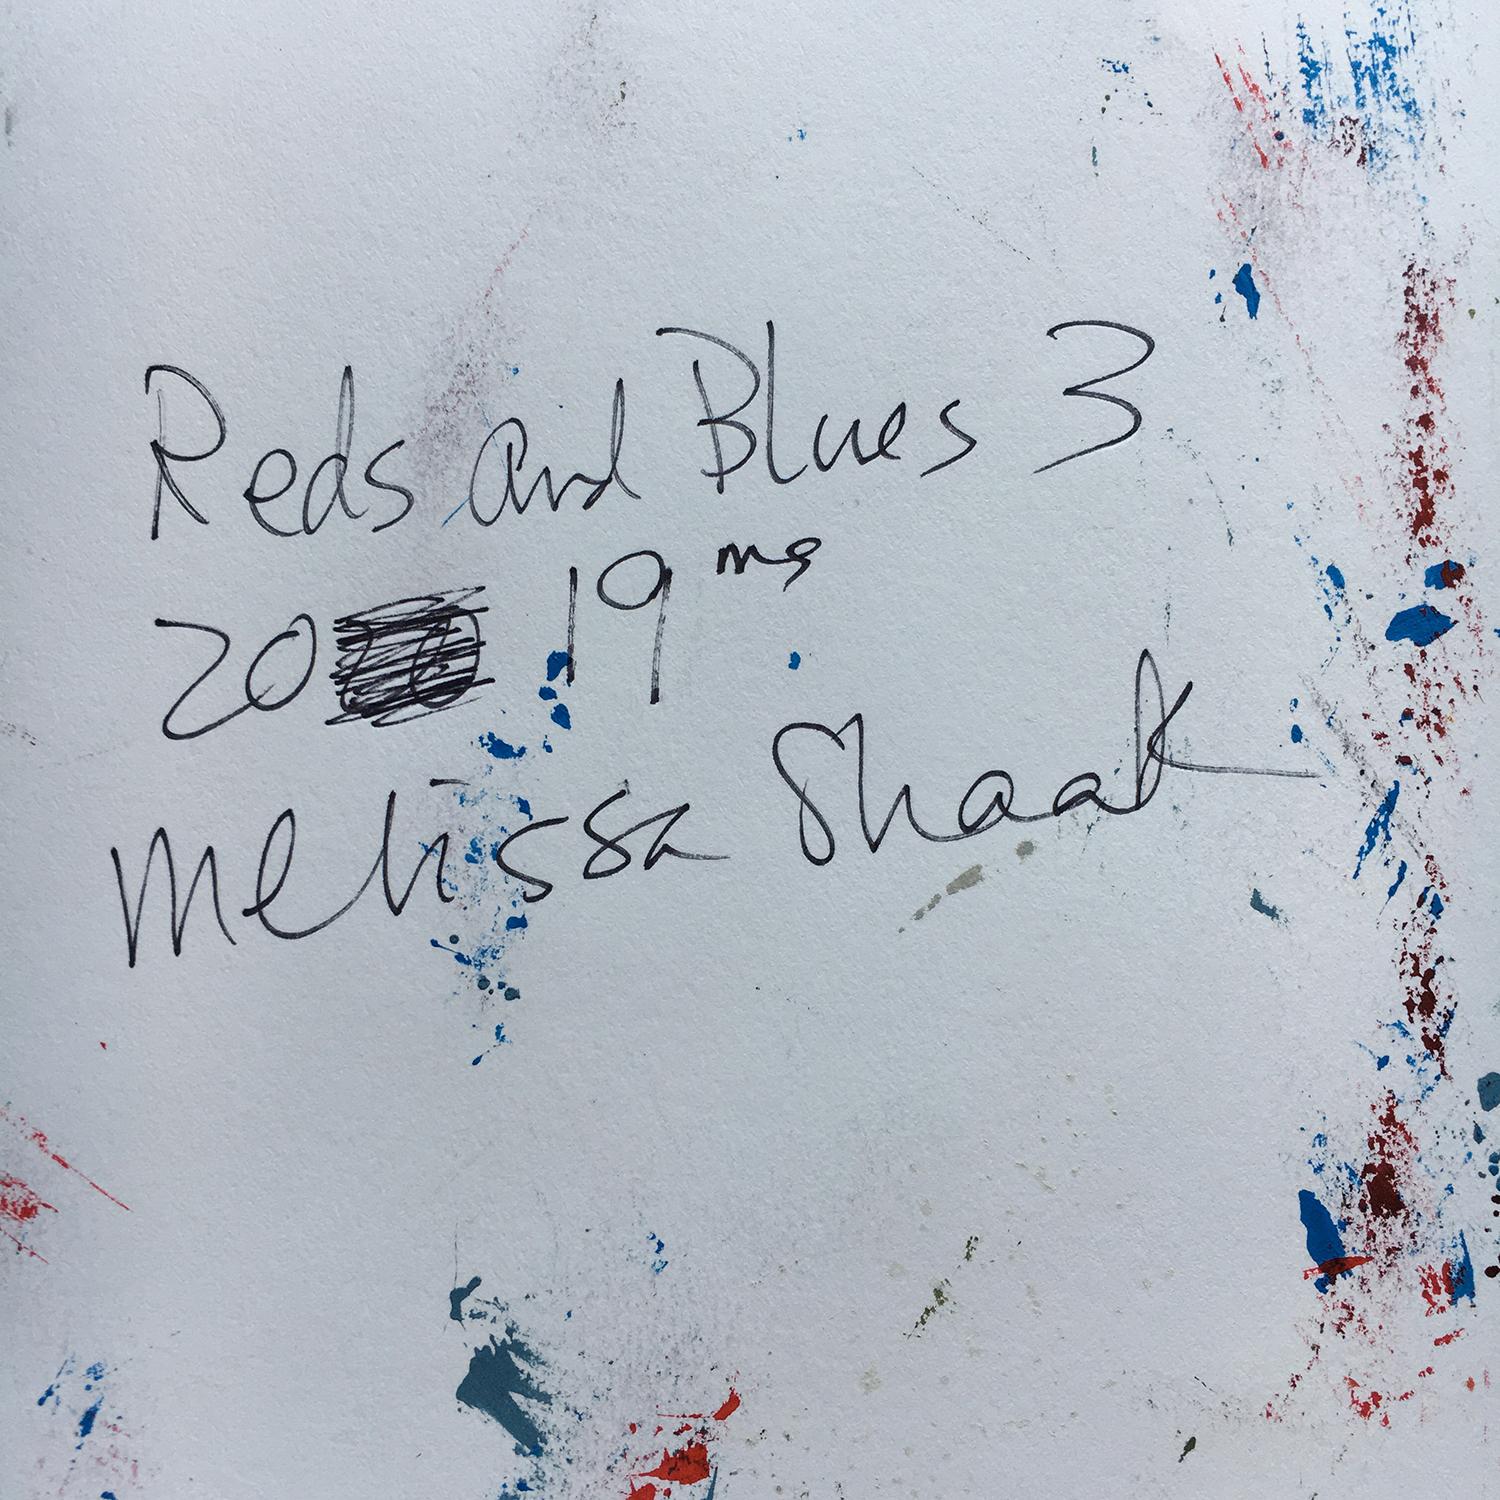 Melissa Shaak’s “Reds and Blues 3” is a 30 x 22 inch abstract acrylic painting on top-quality Stonehenge paper. Vibrant red dominates this painting. Bold, curving lines define shapes that evoke whimsical creatures. Sections of blue provide a